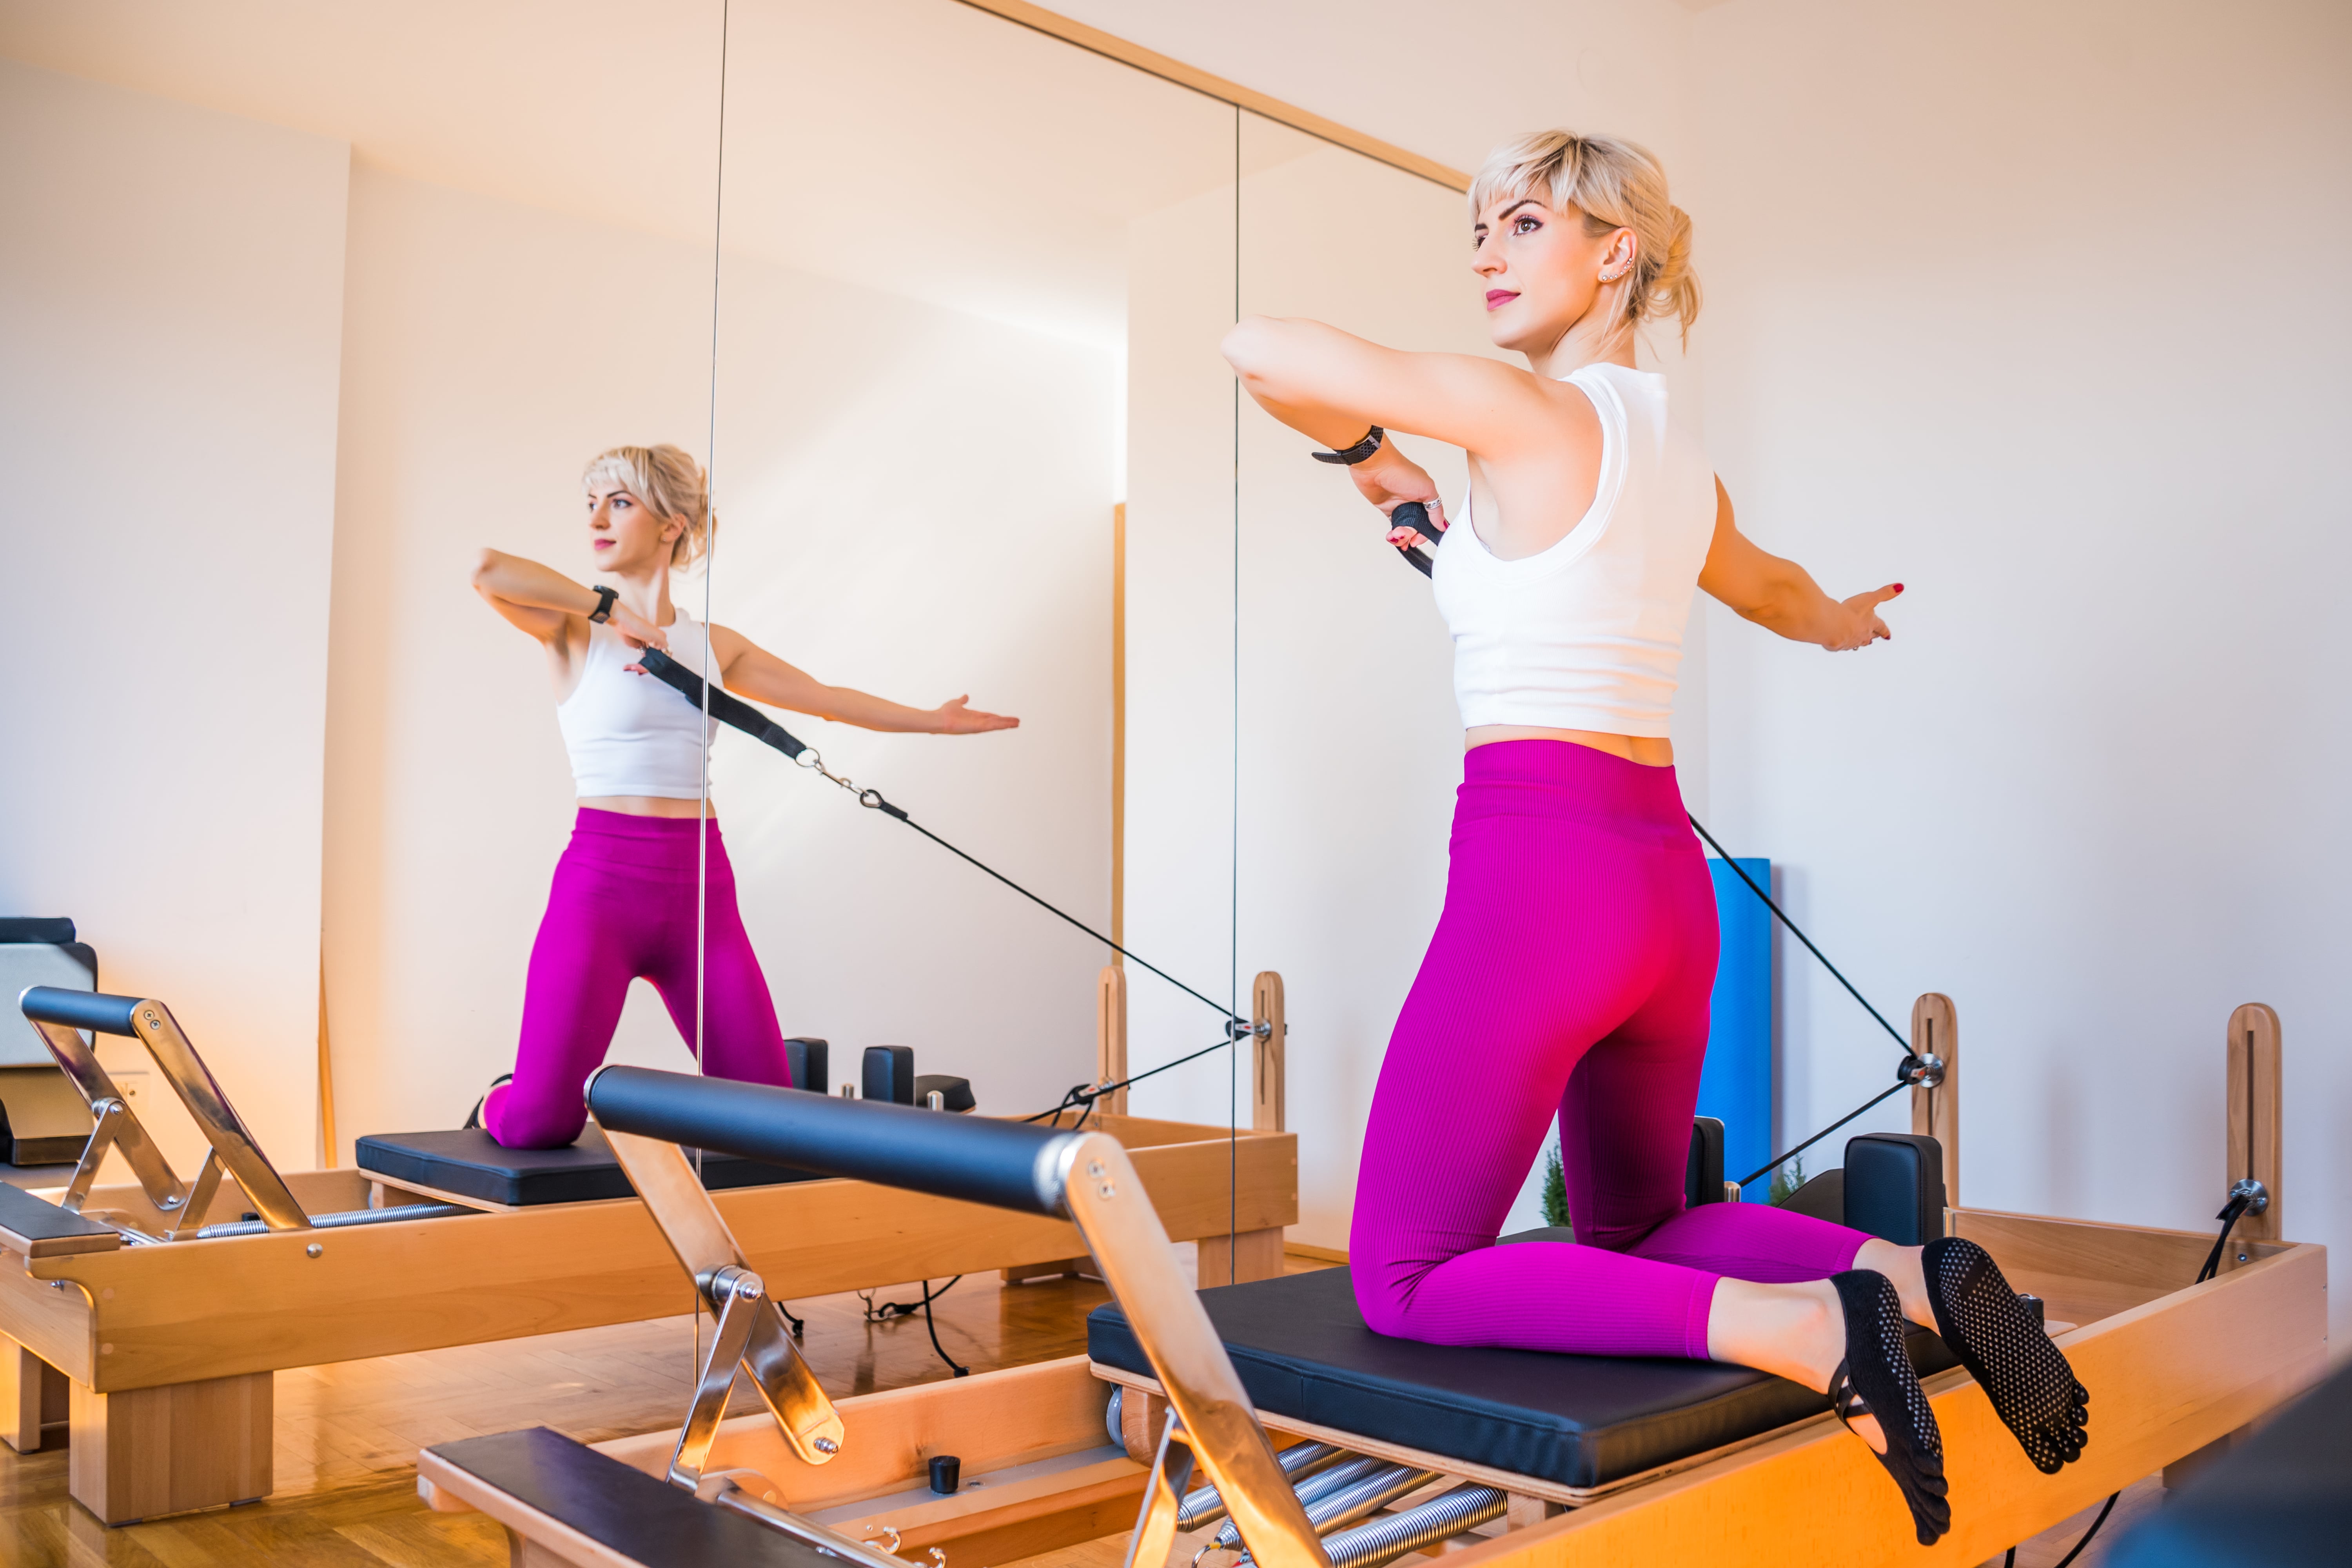 What's The Best Outfit For A Pilates Class?